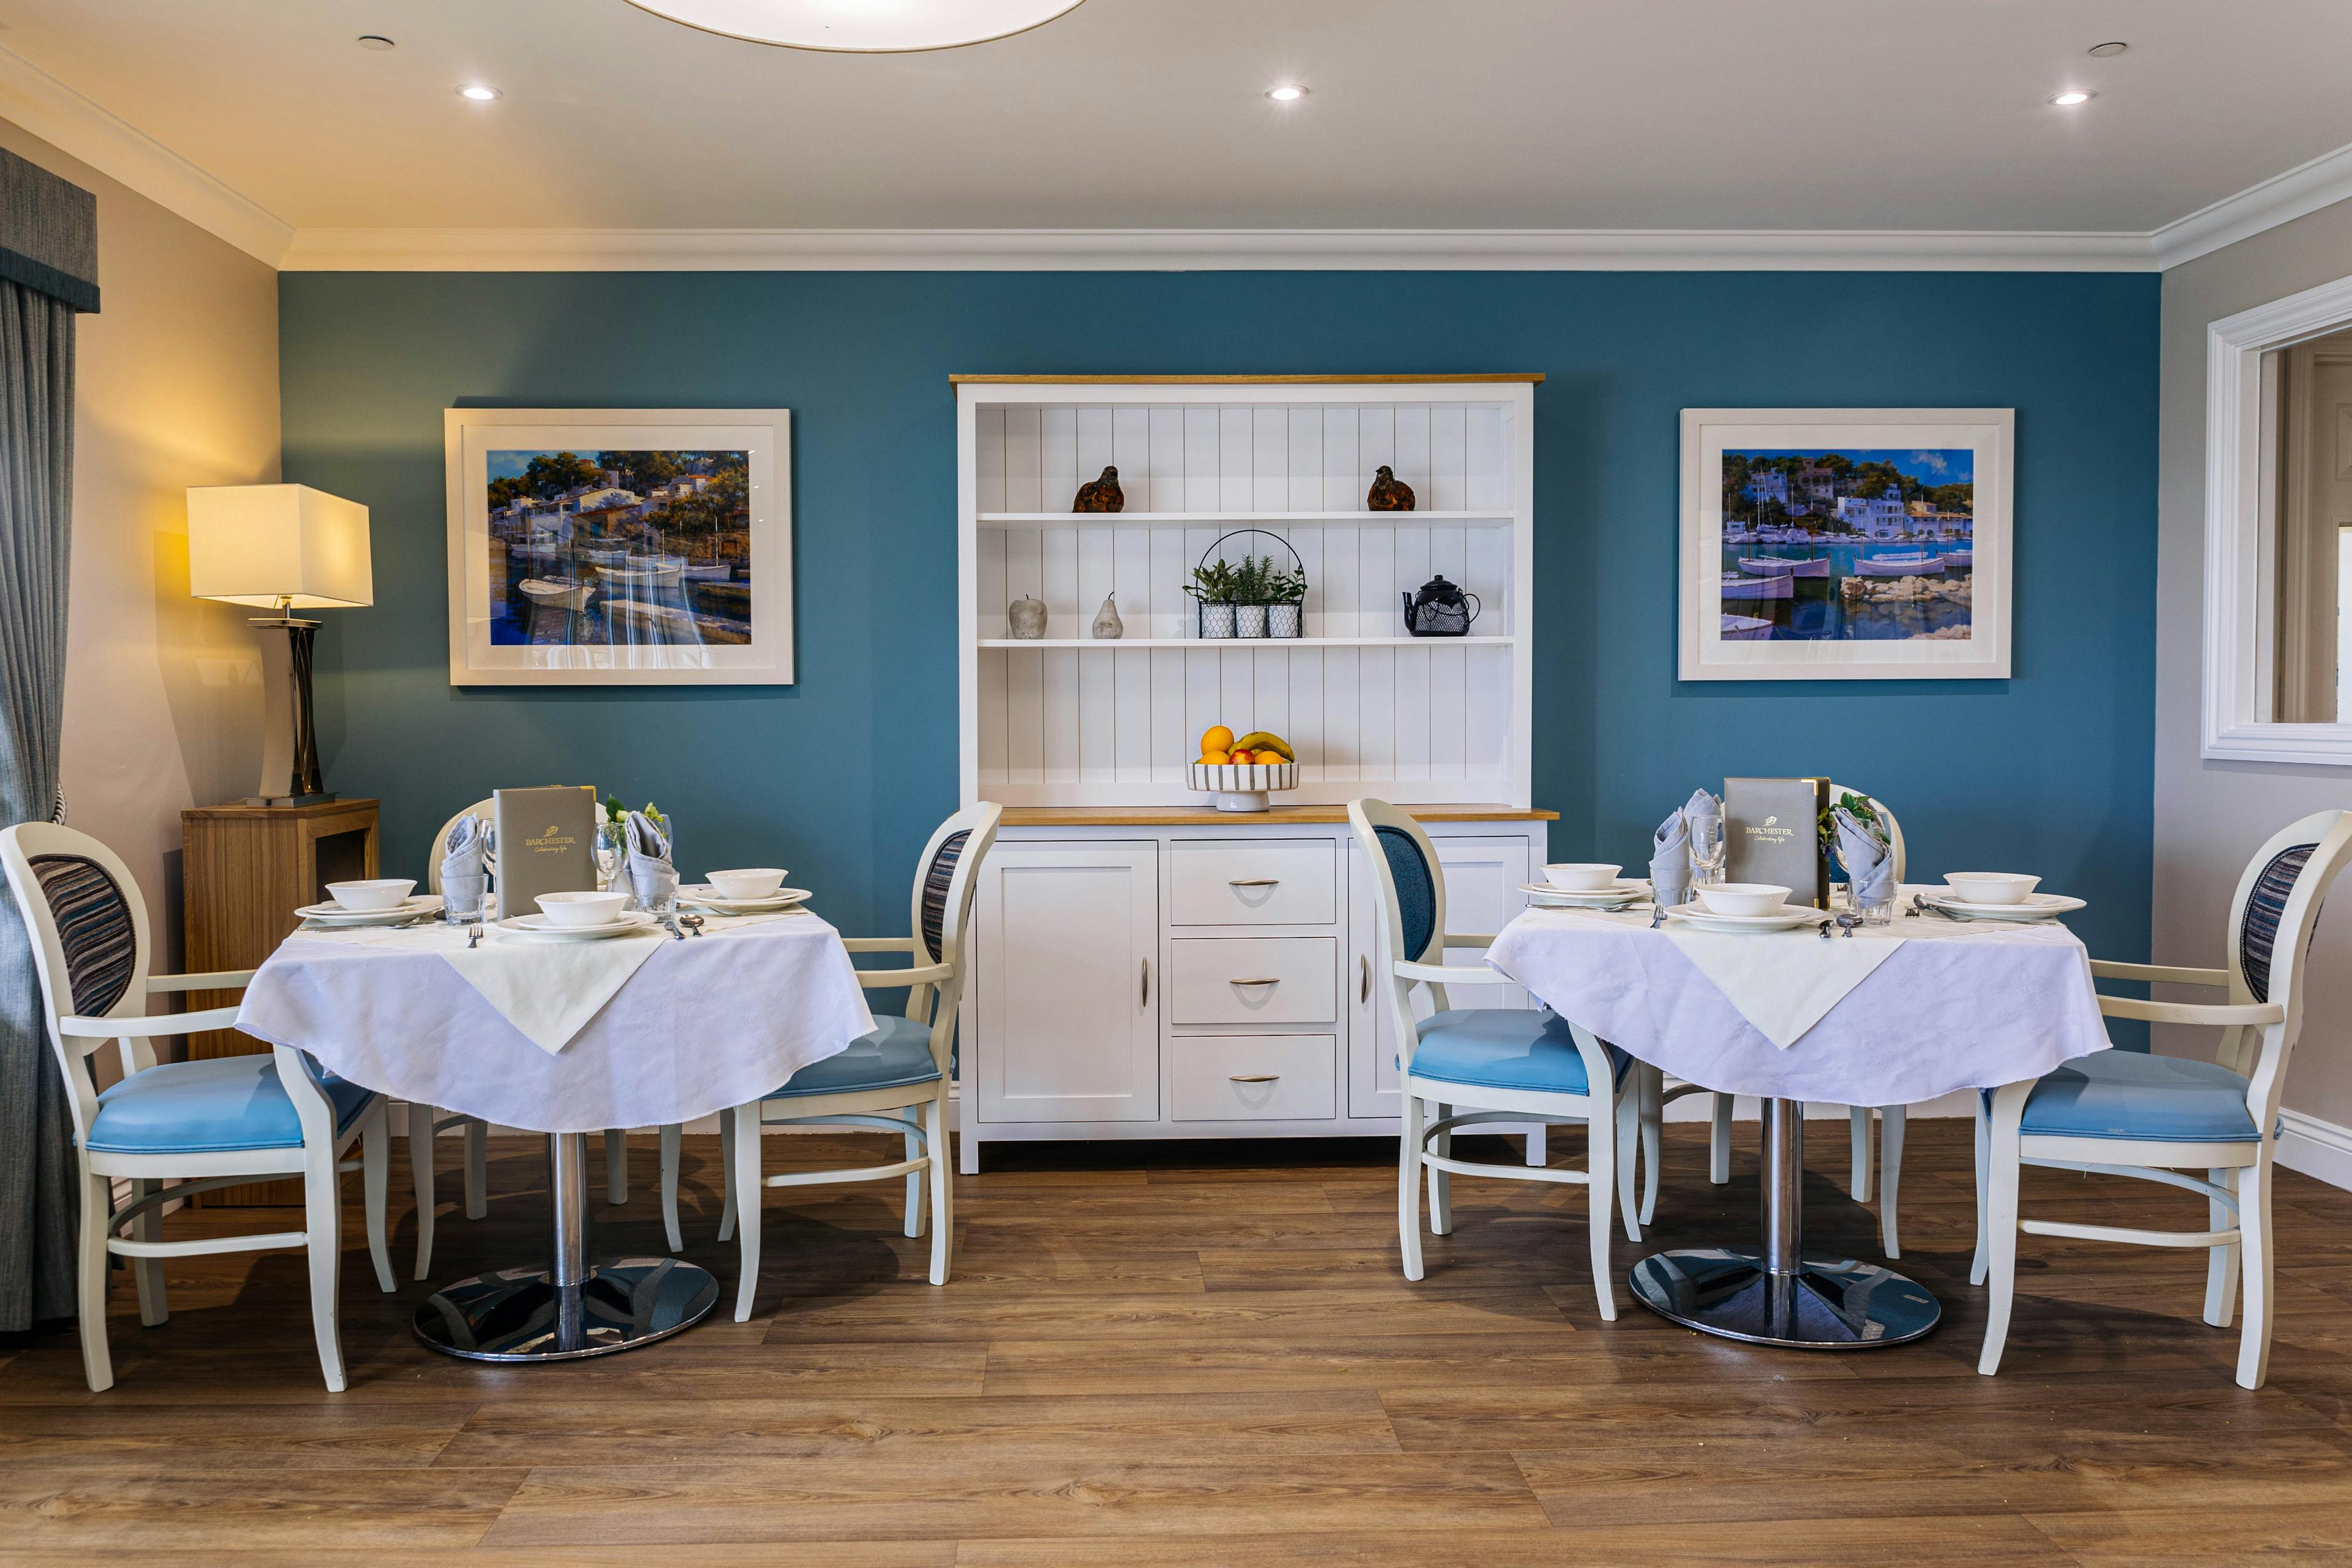 Dining Room at Oak Grange Care Home in Chester, Cheshire